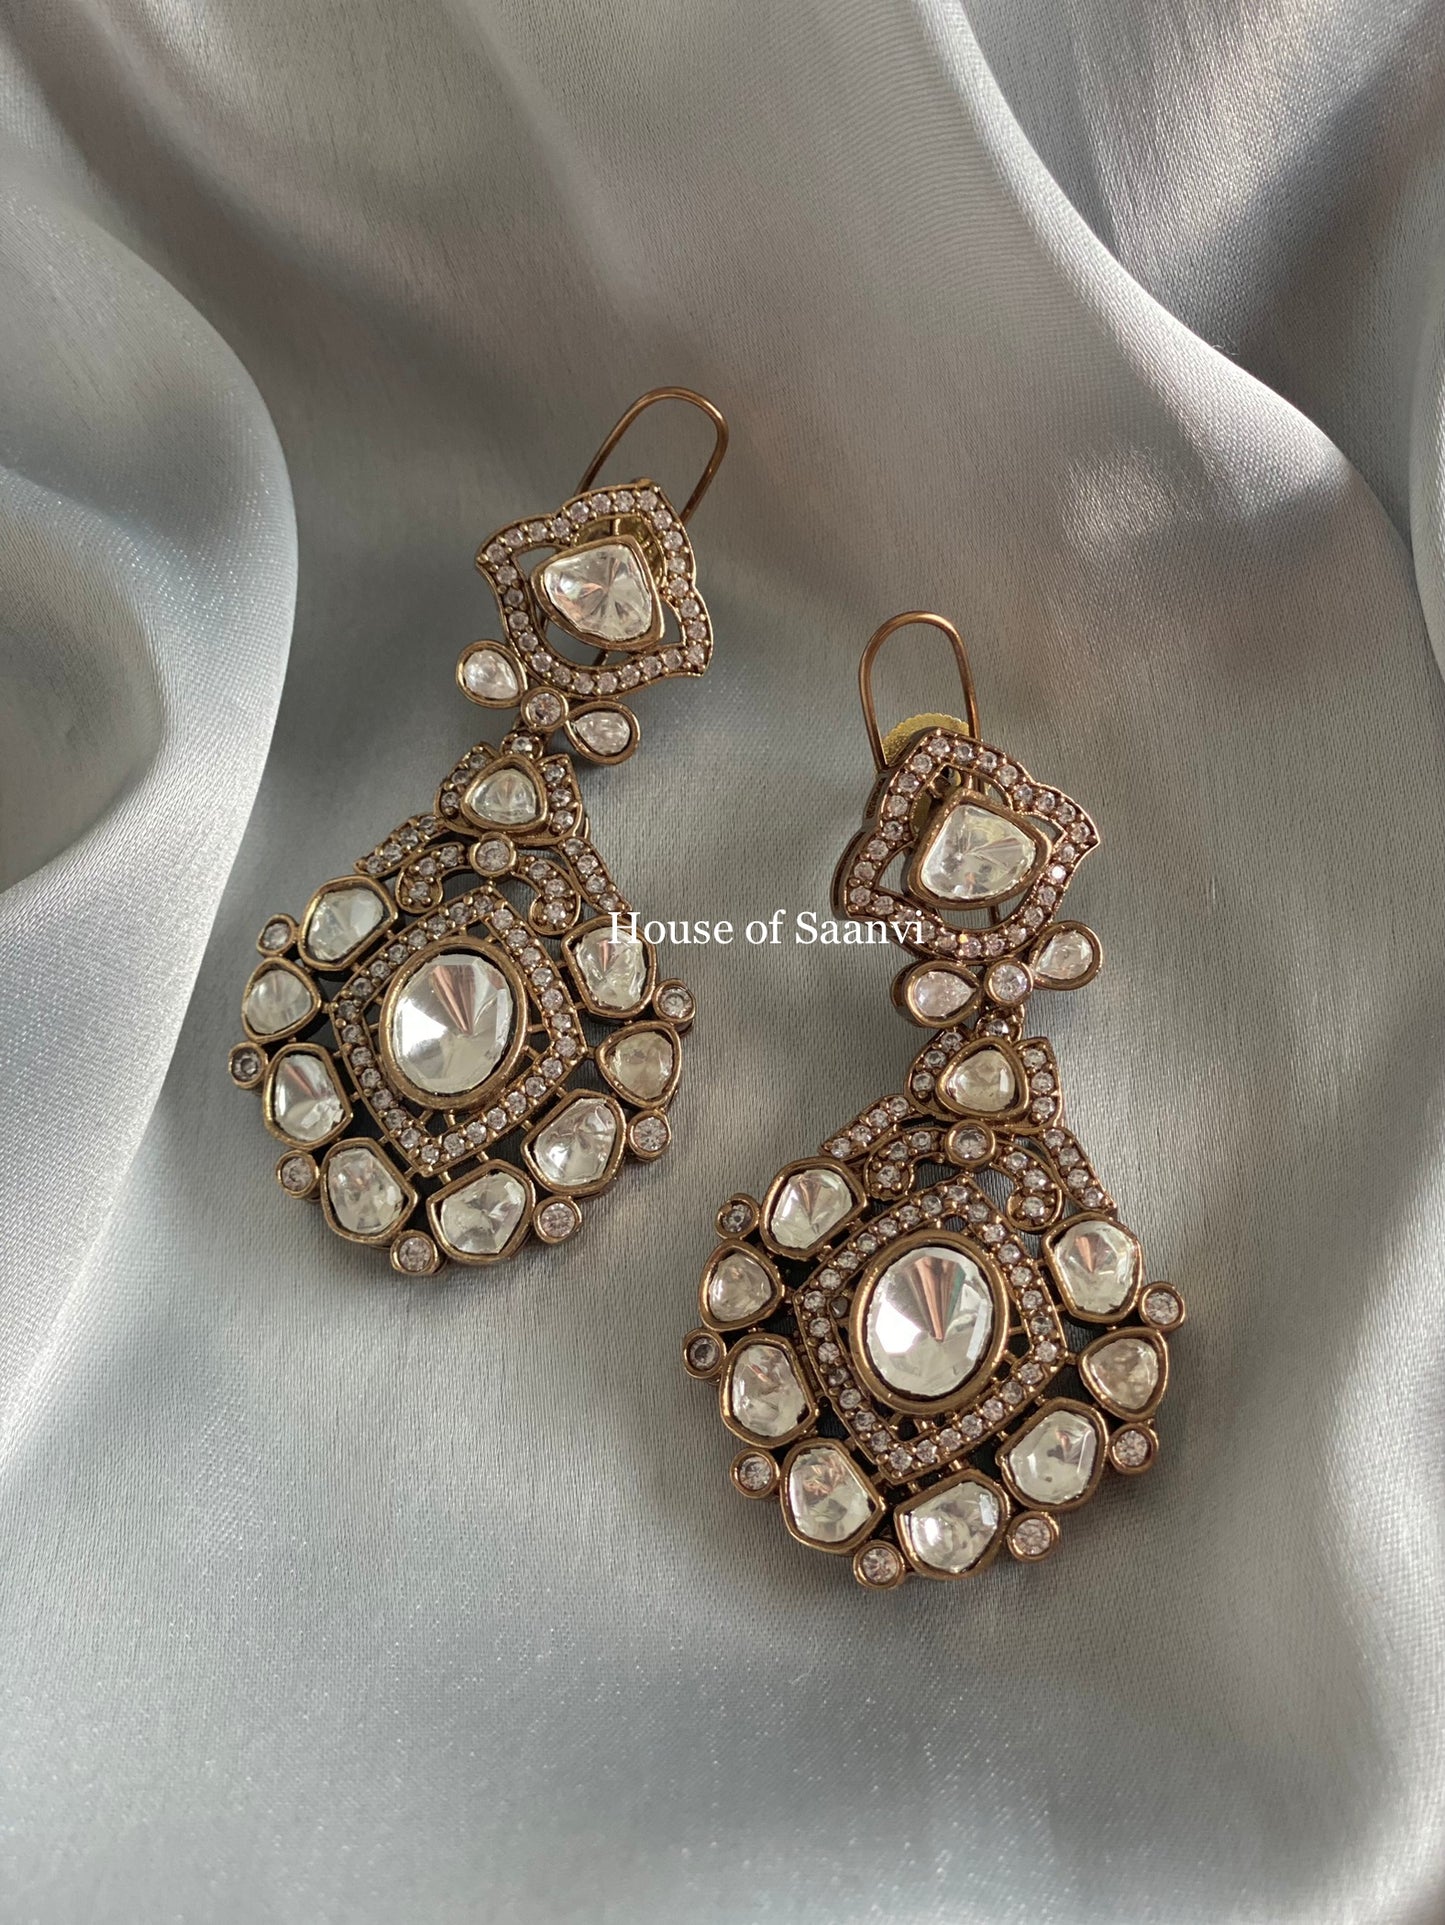 ASIFA Premium Quality Moissanite Statement Earrings in Victorian Finish